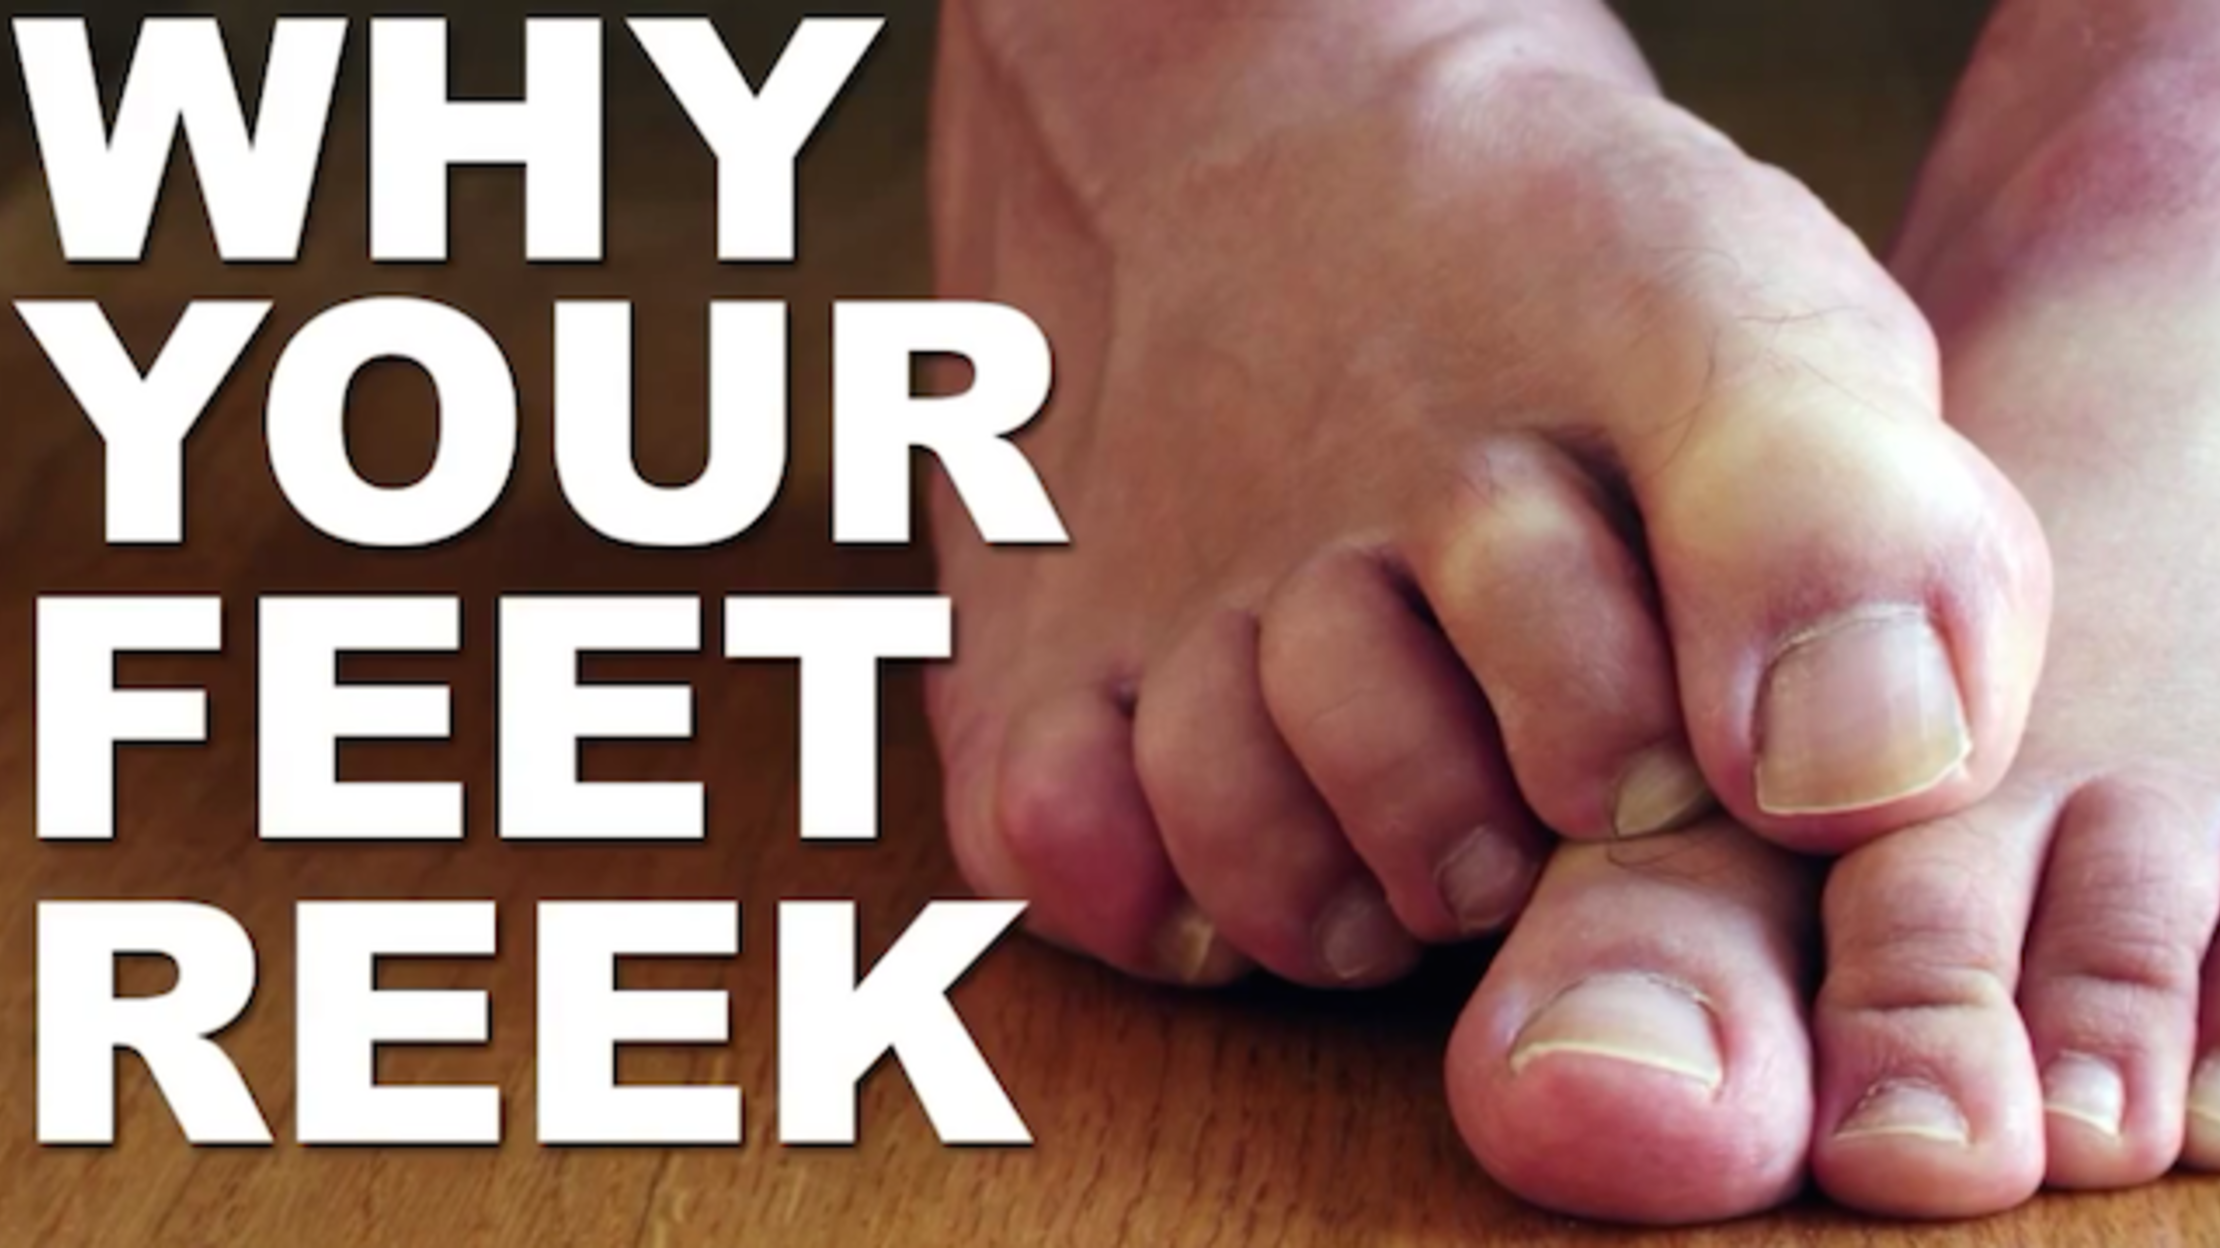 What Makes Your Feet So Smelly Mental Floss